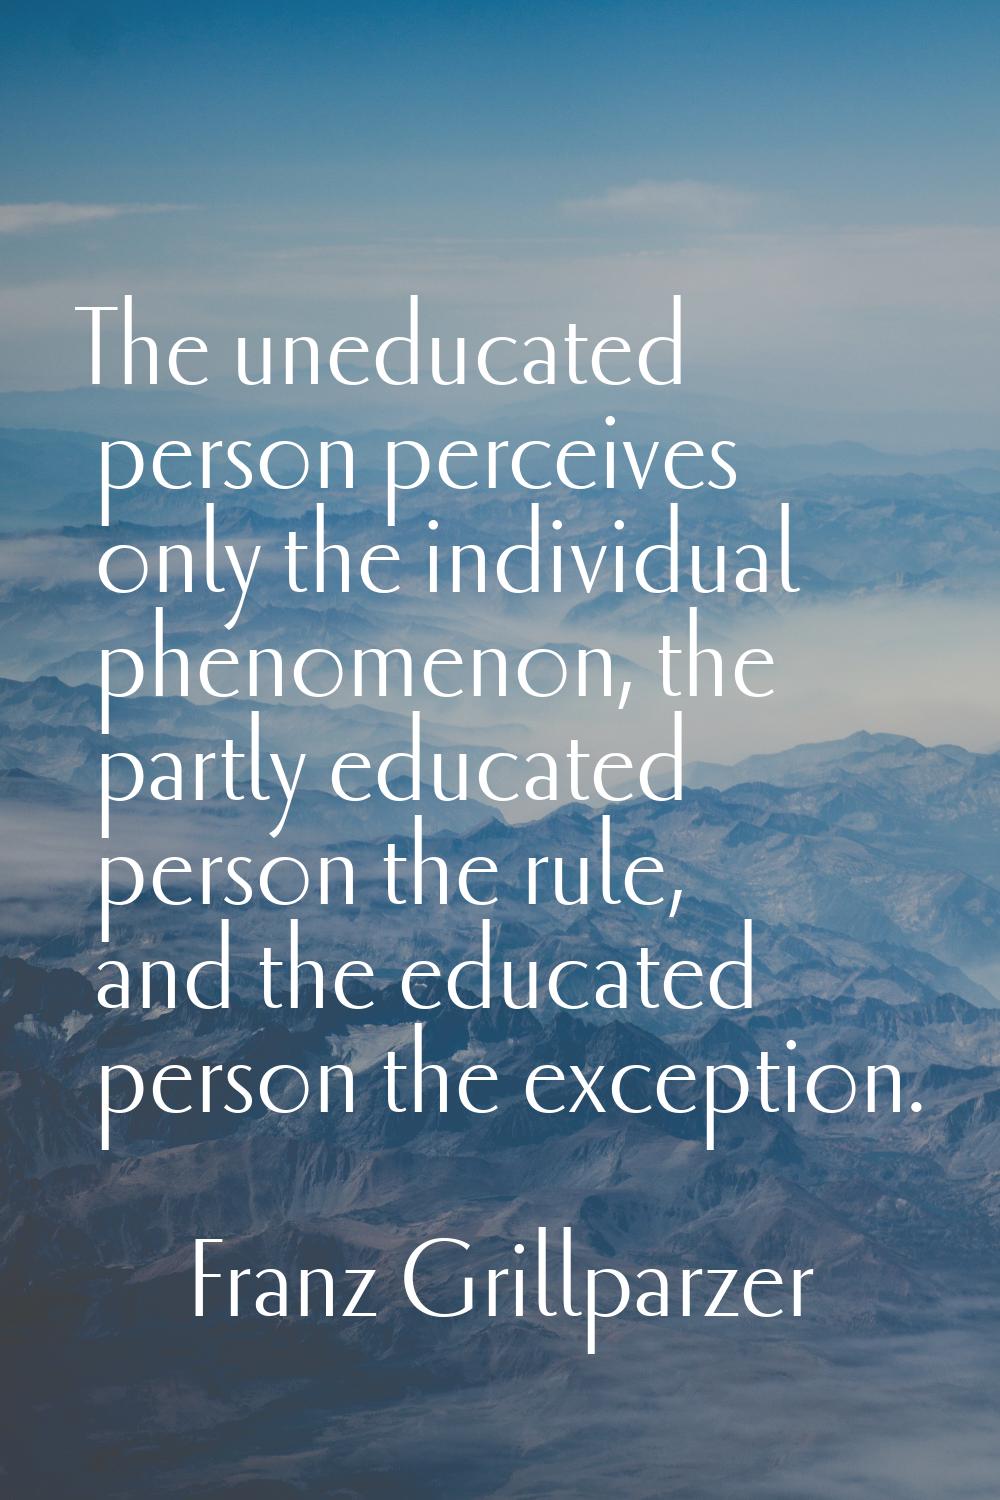 The uneducated person perceives only the individual phenomenon, the partly educated person the rule